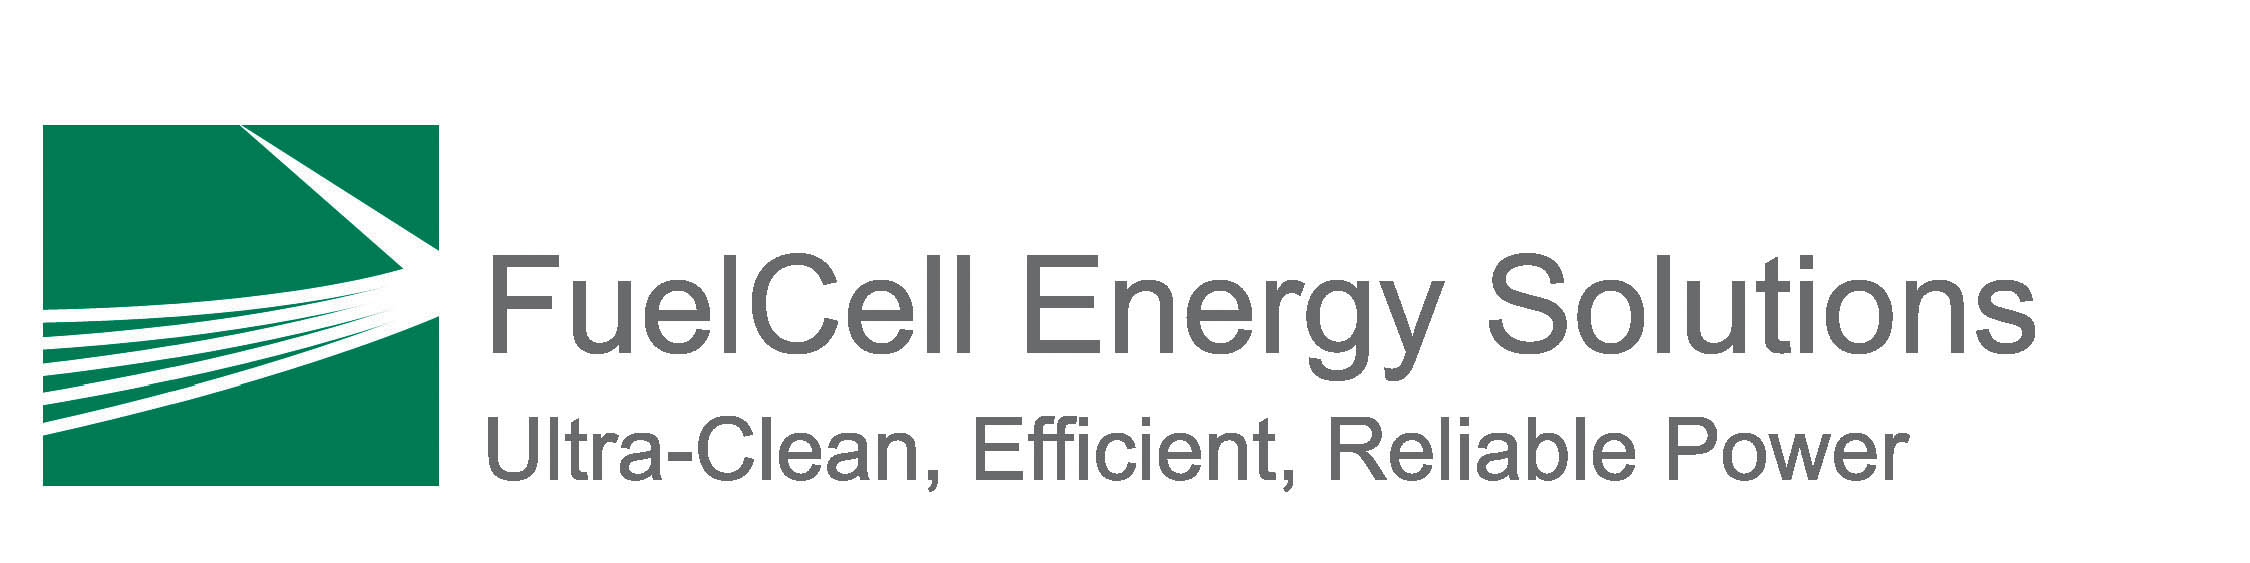 FuelCell Energy Solutions Logo